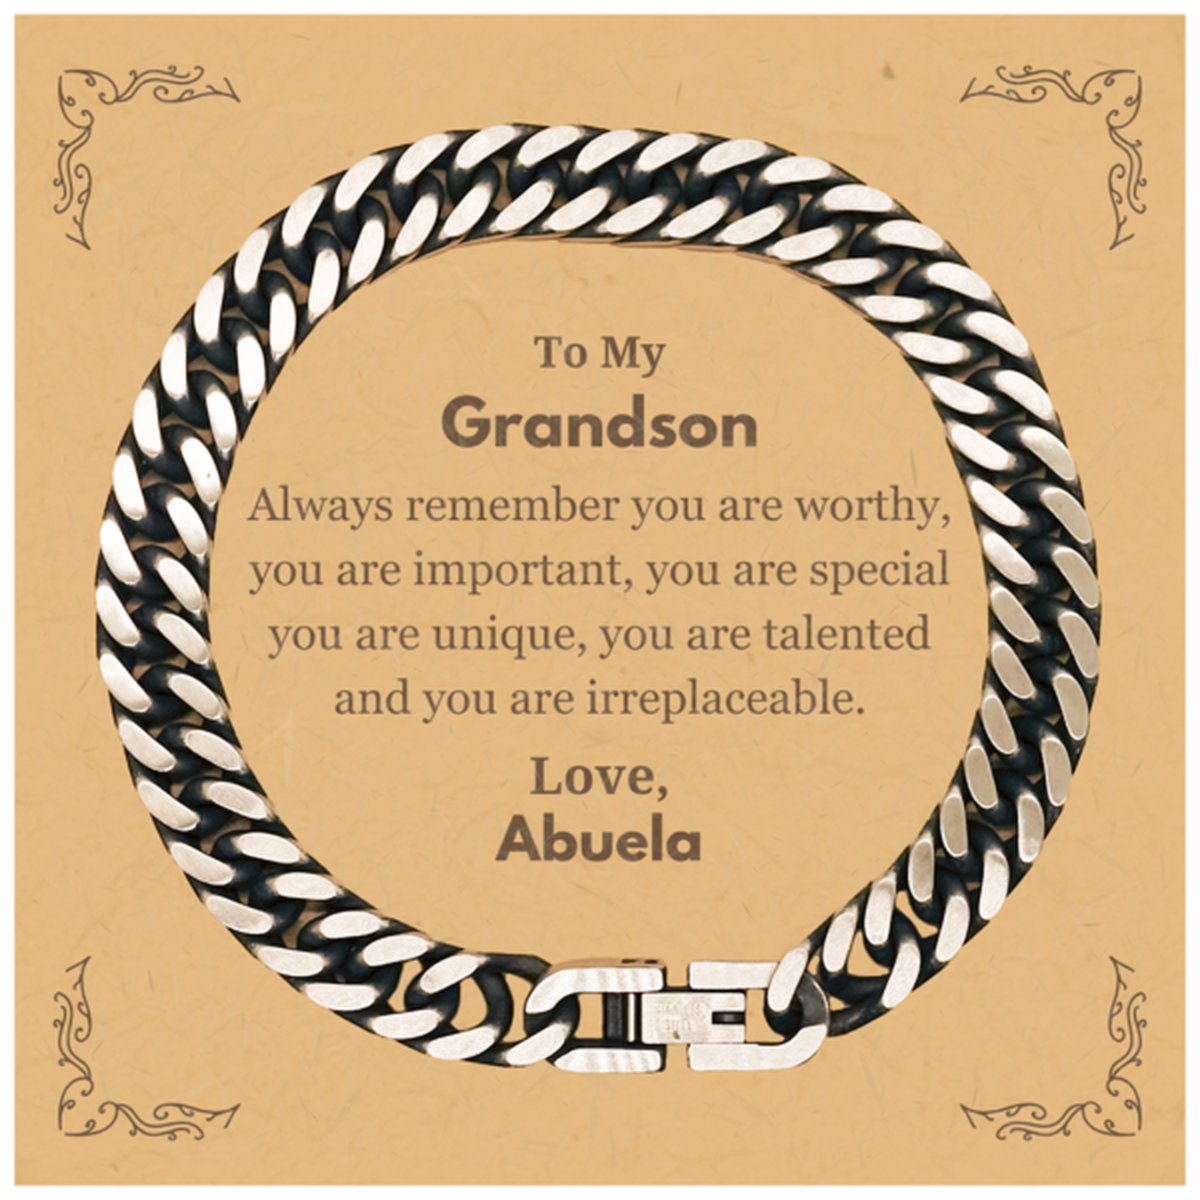 Grandson Birthday Gifts from Abuela, Inspirational Cuban Link Chain Bracelet for Grandson Christmas Graduation Gifts for Grandson Always remember you are worthy, you are important. Love, Abuela